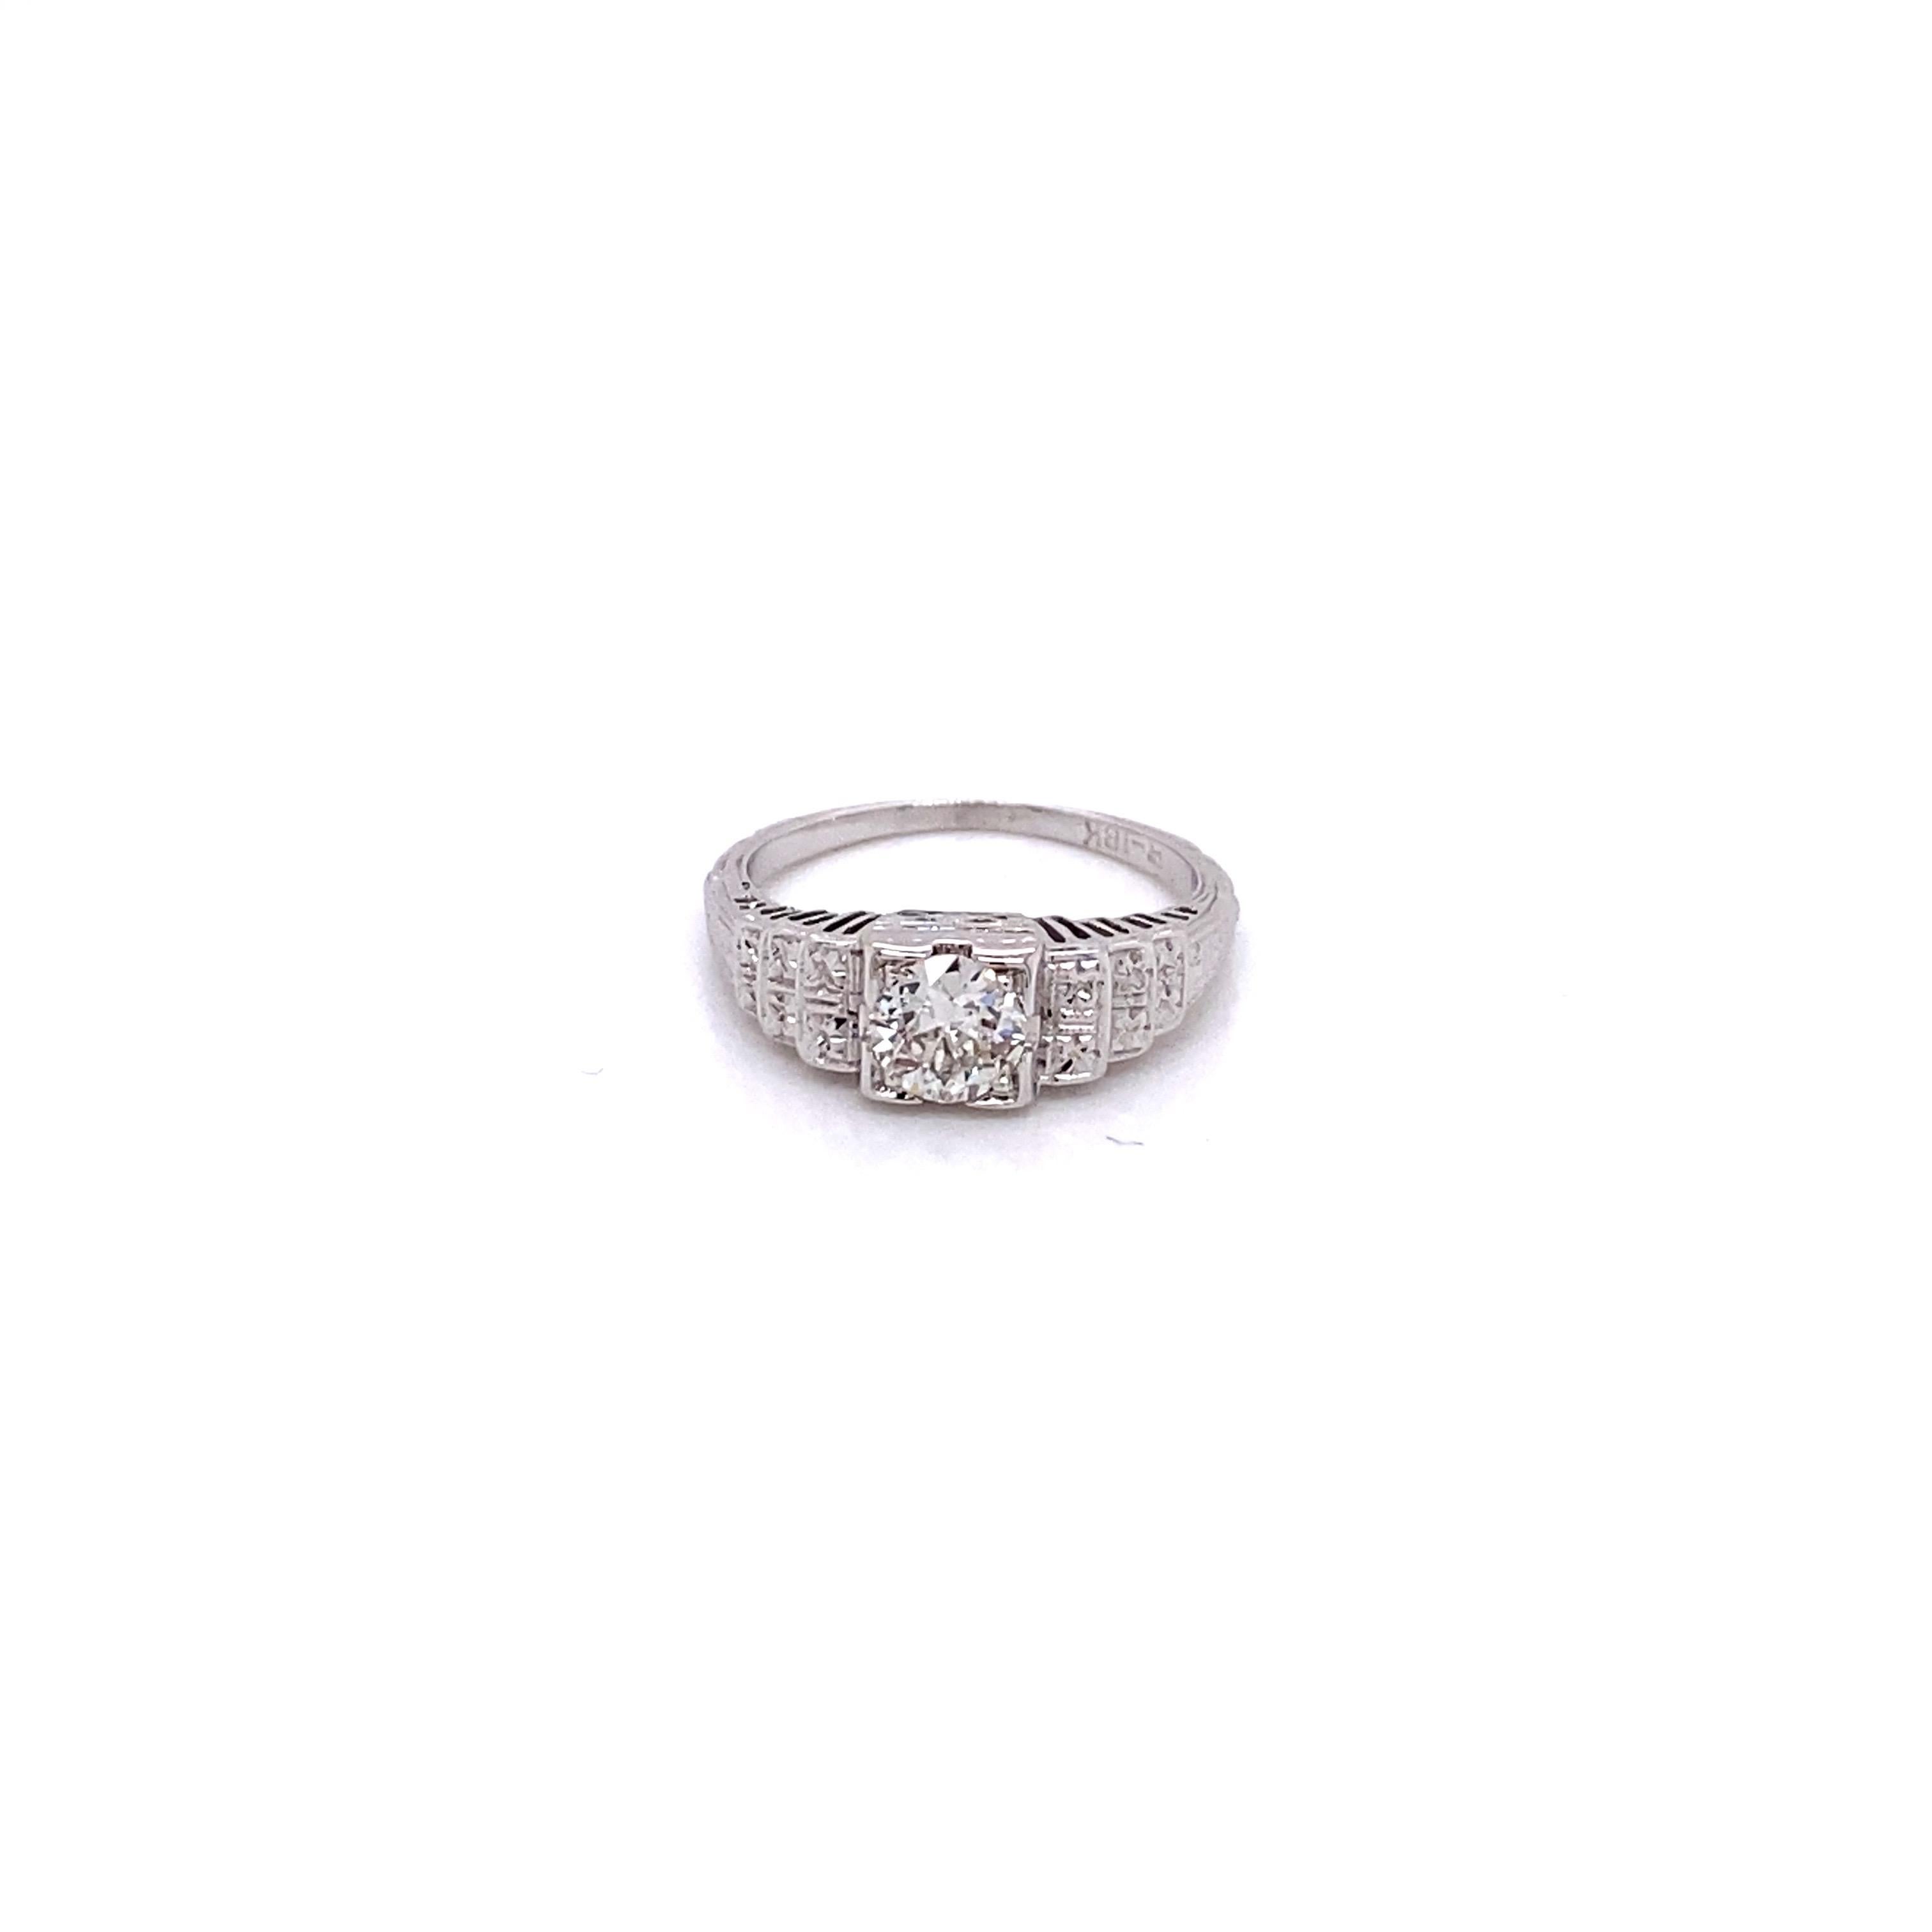 Vintage 1930's Art Deco European Cut .50ct Diamond Engagement Ring - The European Cut diamond is I color and VS1 clarity. The diamond has a few small nicks around the edge due to its age which are not visible to the eye. The setting has 4 layers of